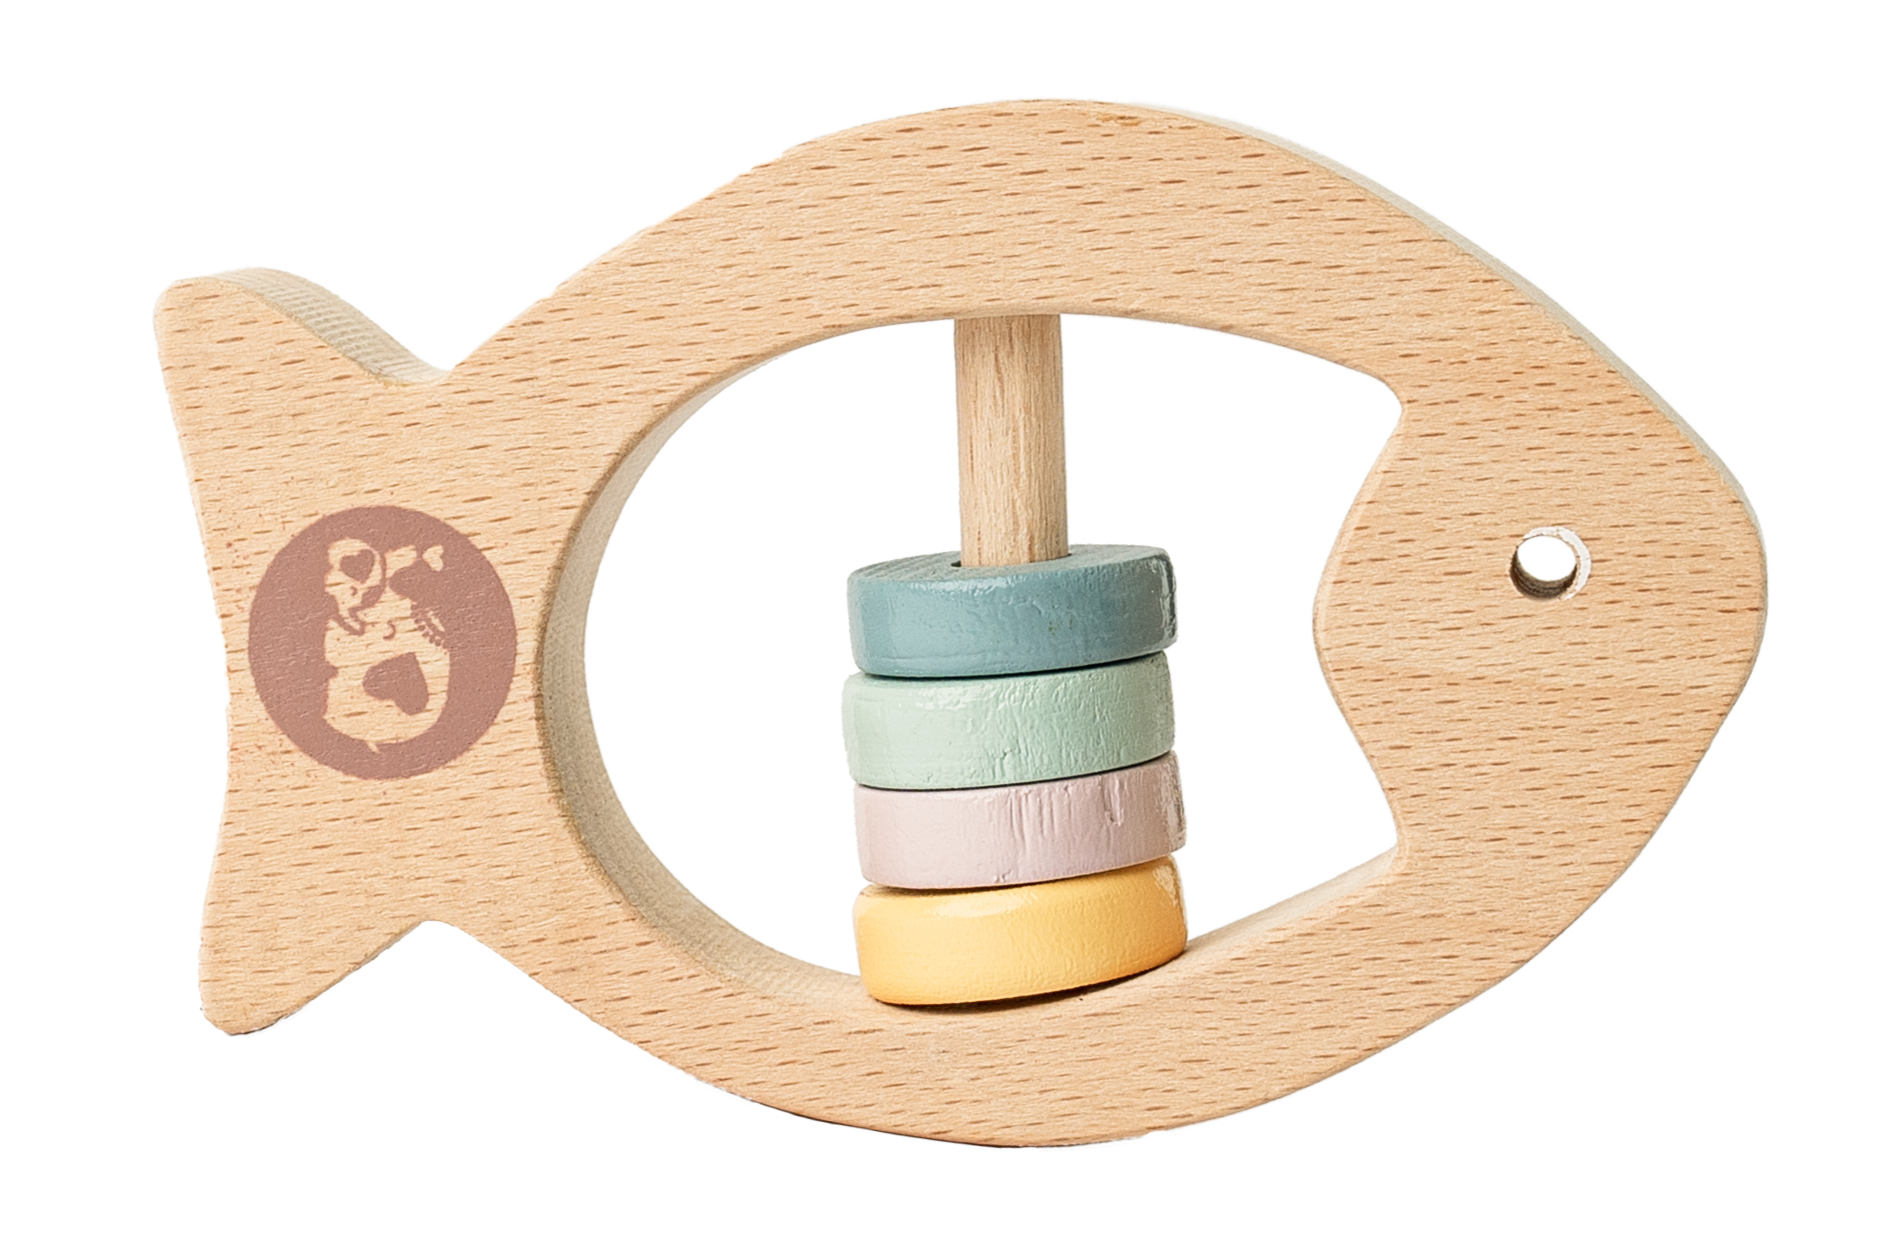 Buy Mr. Fish Wooden Teether with Rattle Online - SkilloToys.com